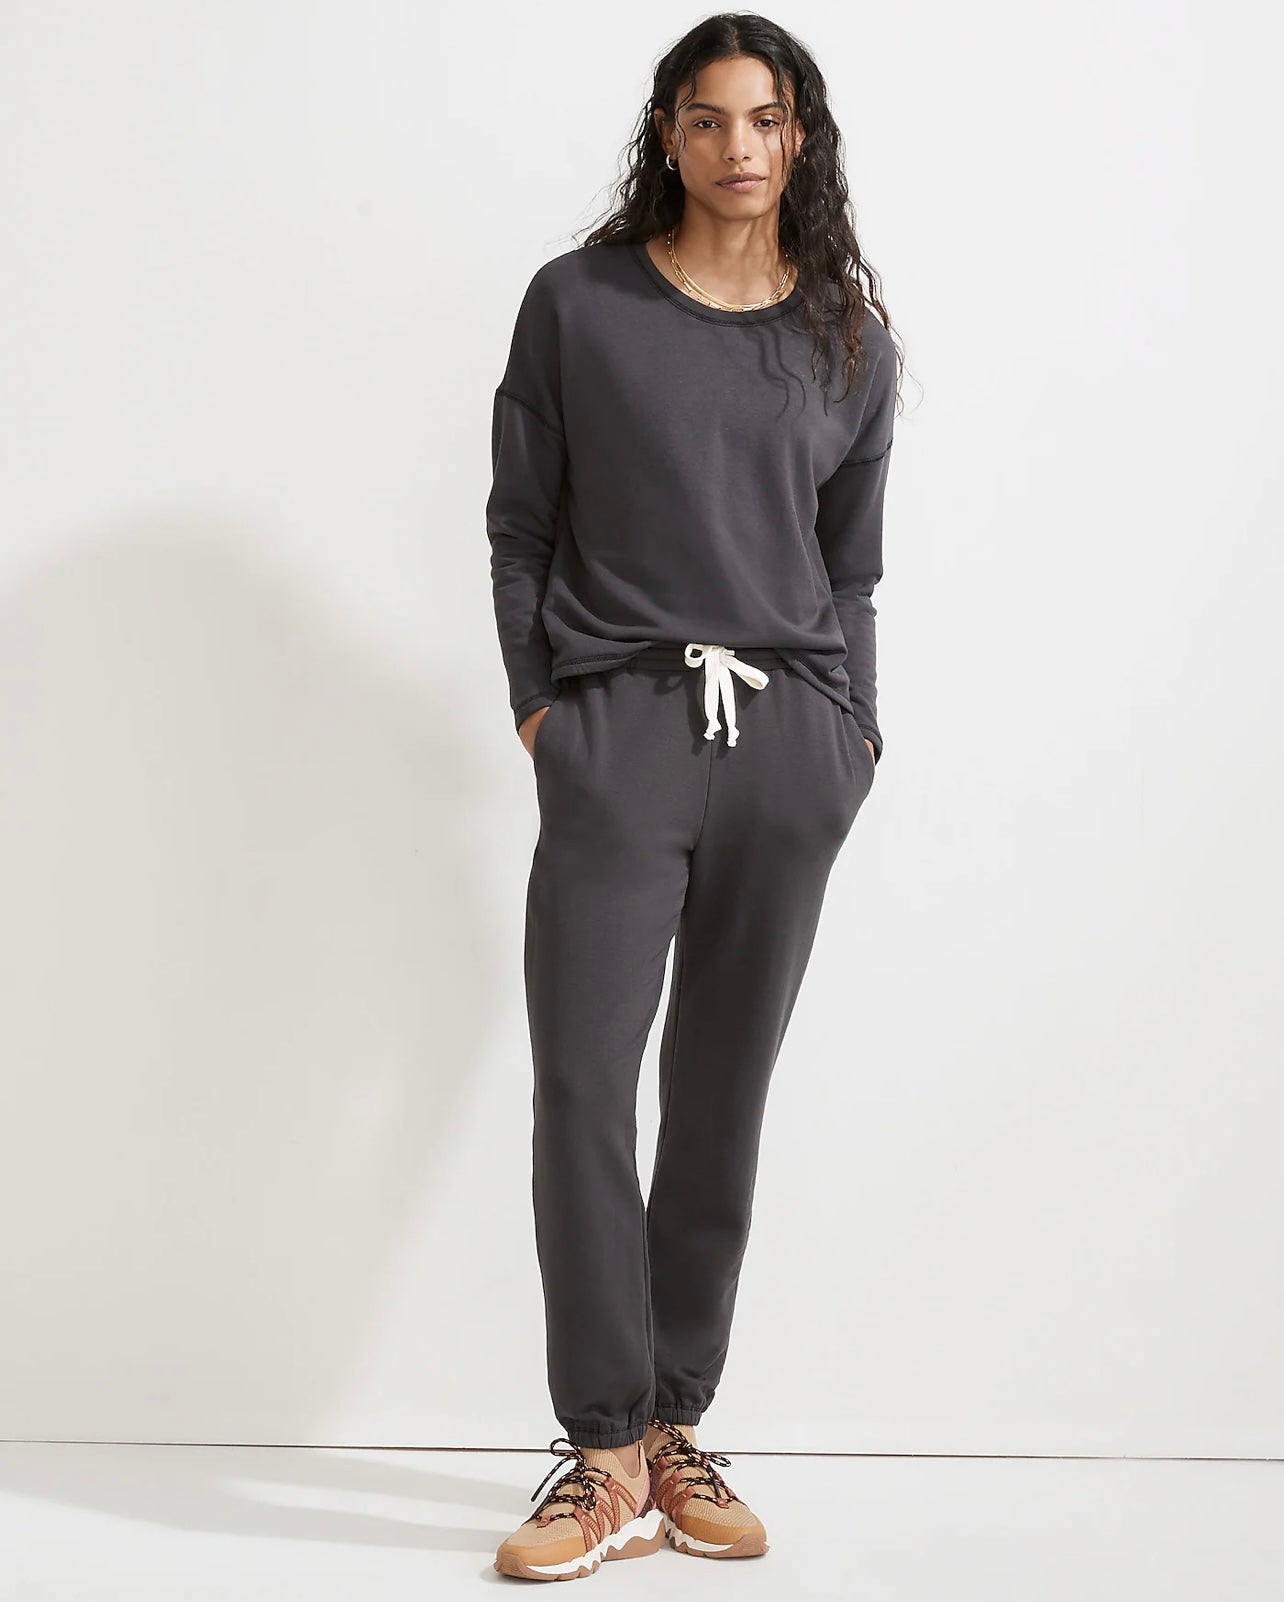 Best Loungewear for Lounging at Home (2021): Sweatpants, Shirts